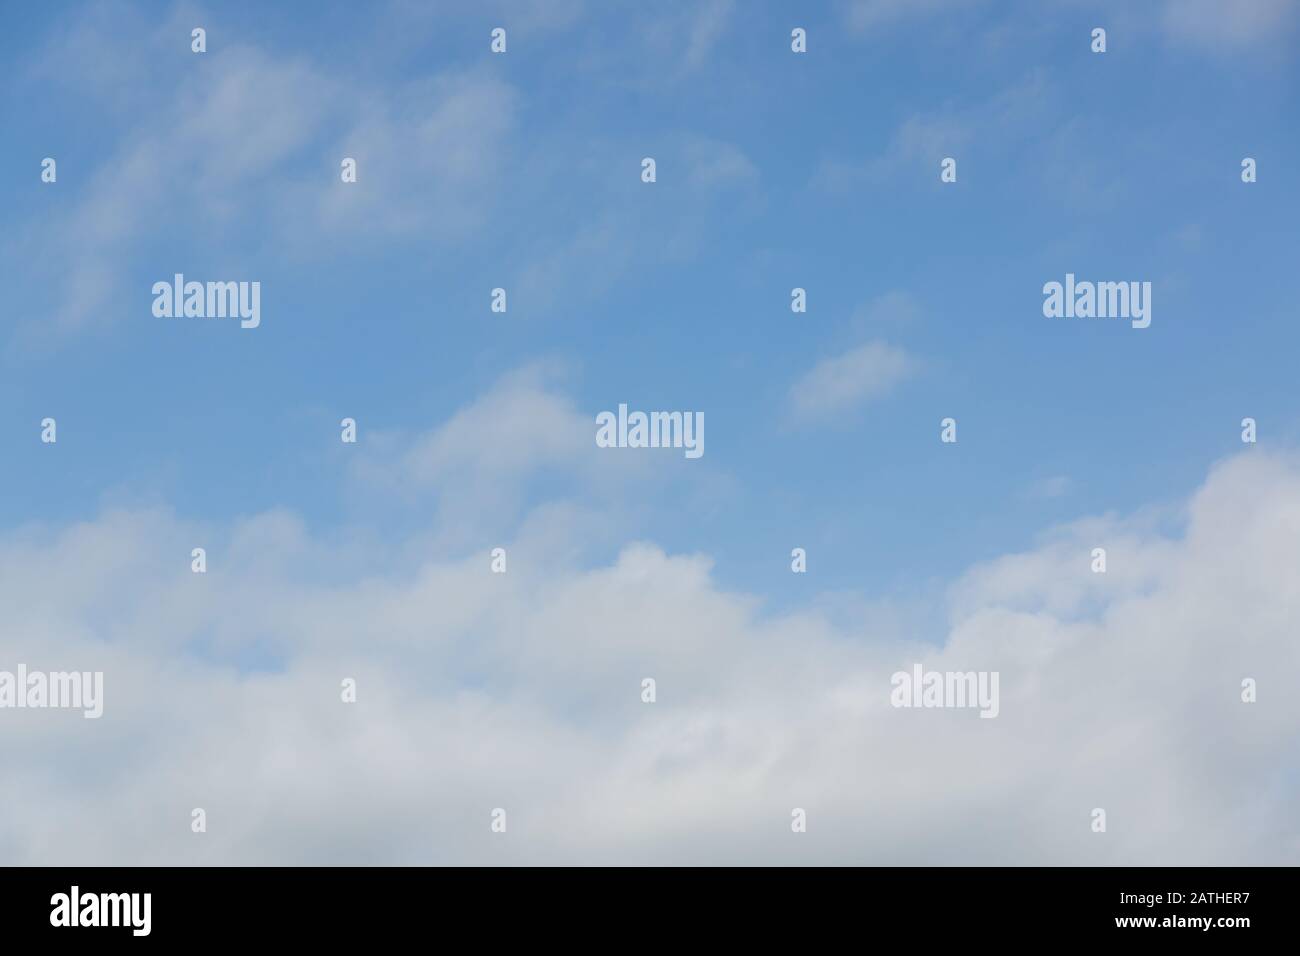 Hazy blue summer sky with whispy white cumulus clouds Stock Photo